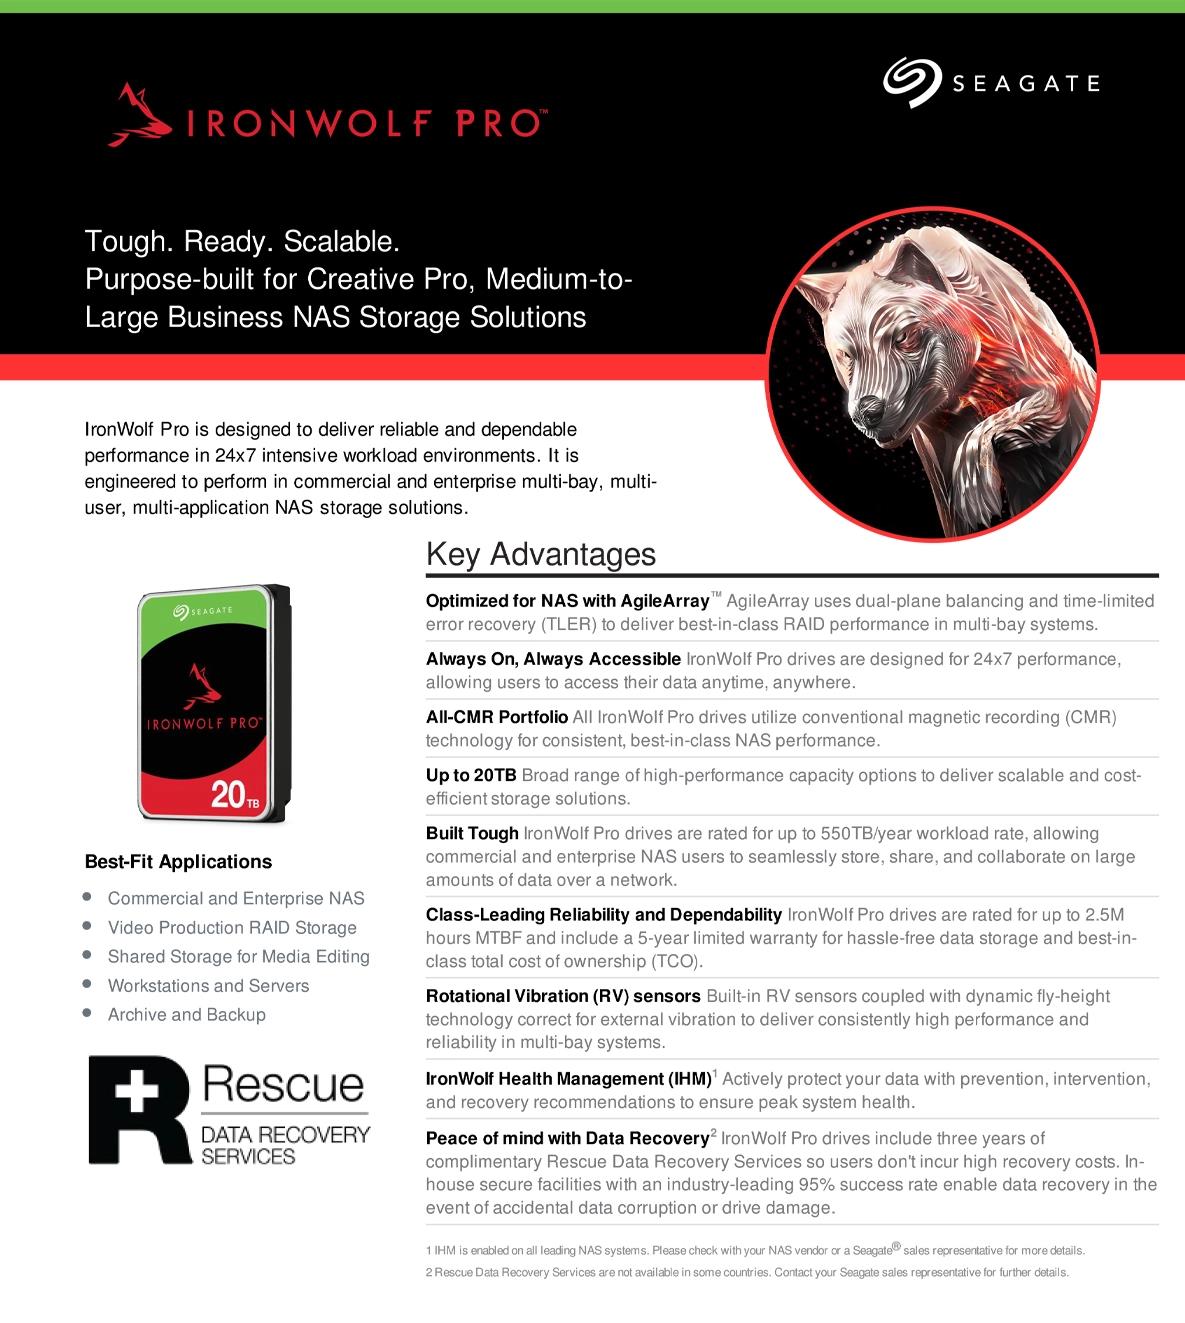 A large marketing image providing additional information about the product Seagate IronWolf Pro 3.5" NAS HDD - 12TB 256MB - Additional alt info not provided